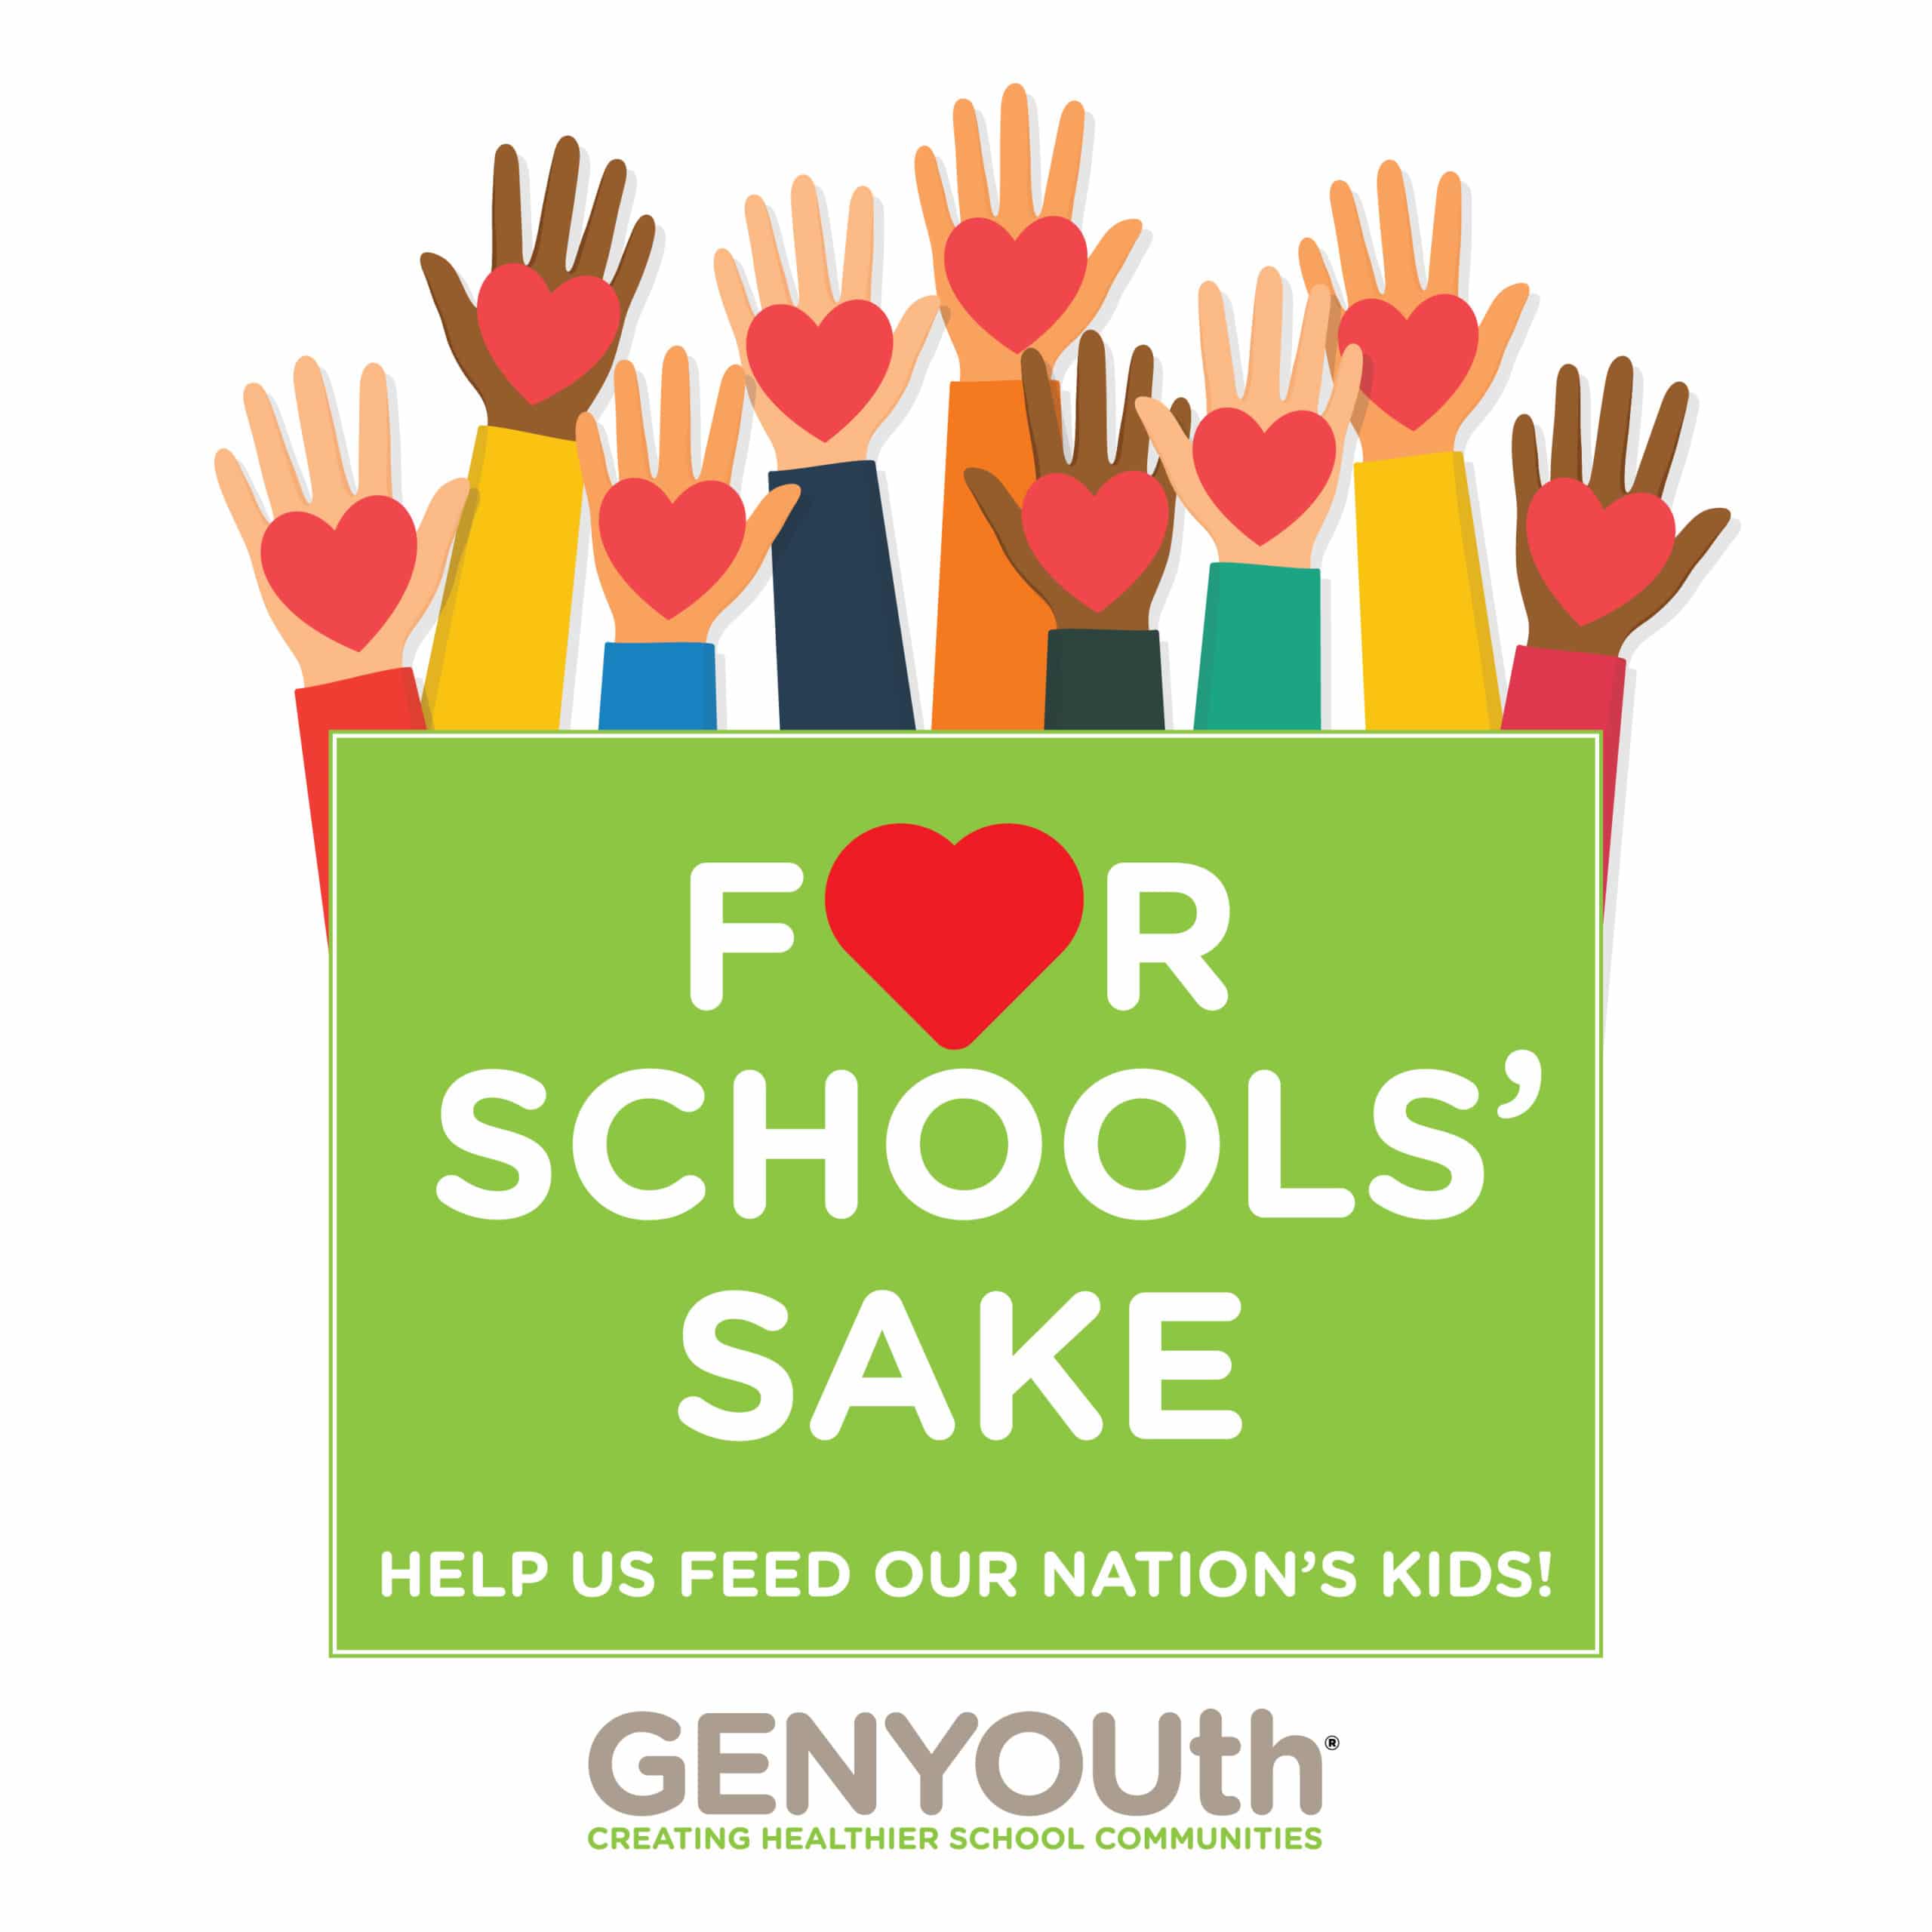 Out-of-School Students Can Get More Access to Milk, School Lunches with Grants from GENYOUth